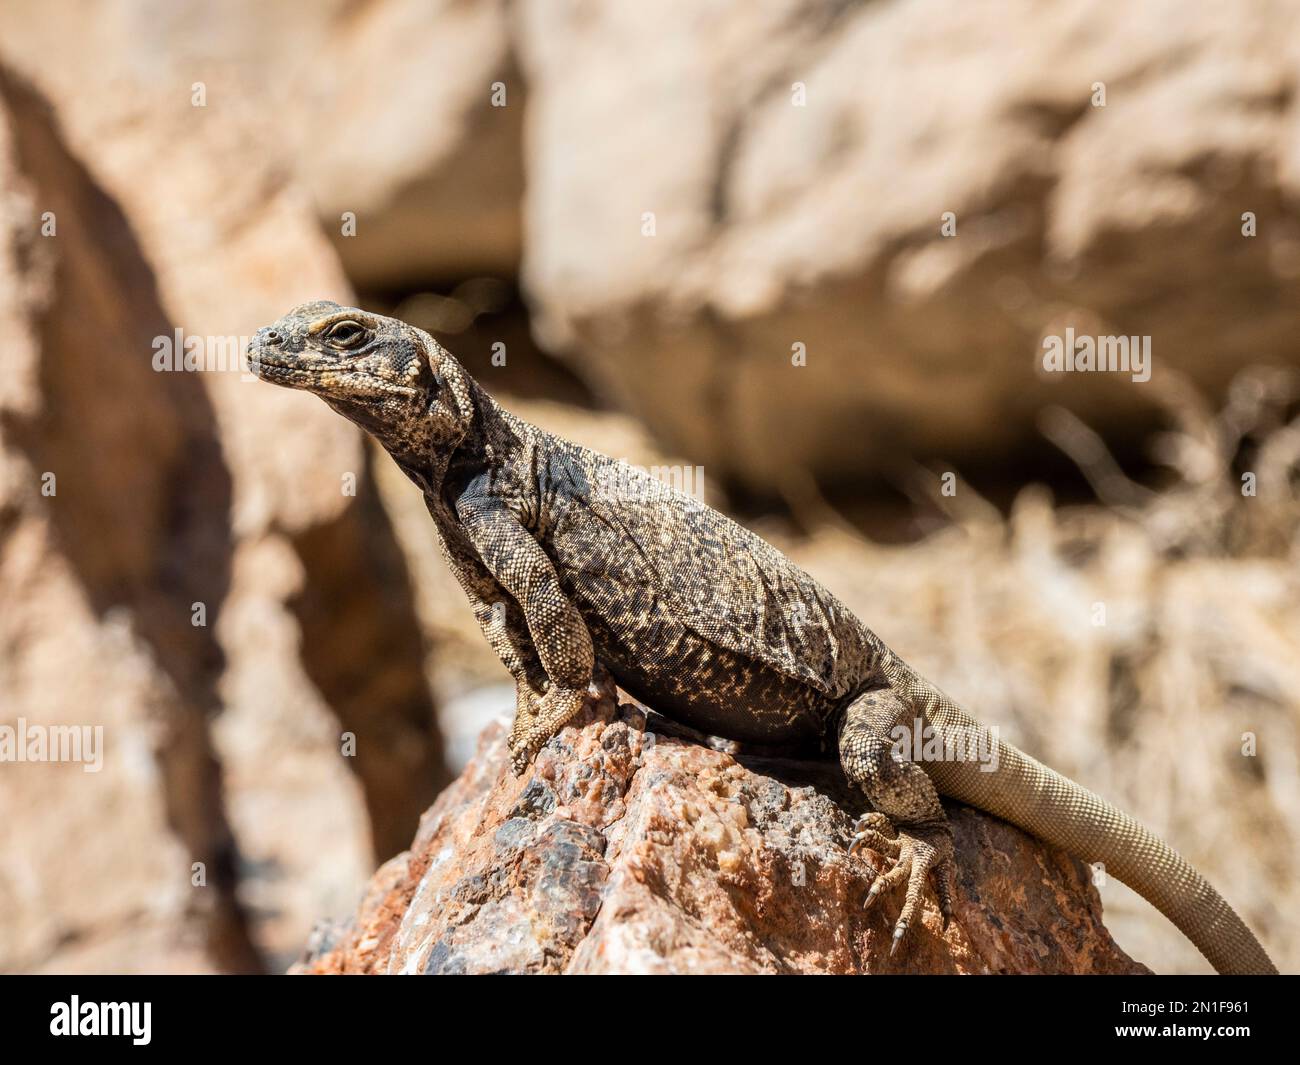 Common chuckwalla (Sauromalus ater), Leadfield in Titus Canyon in Death Valley National Park, California, United States of America, North America Stock Photo